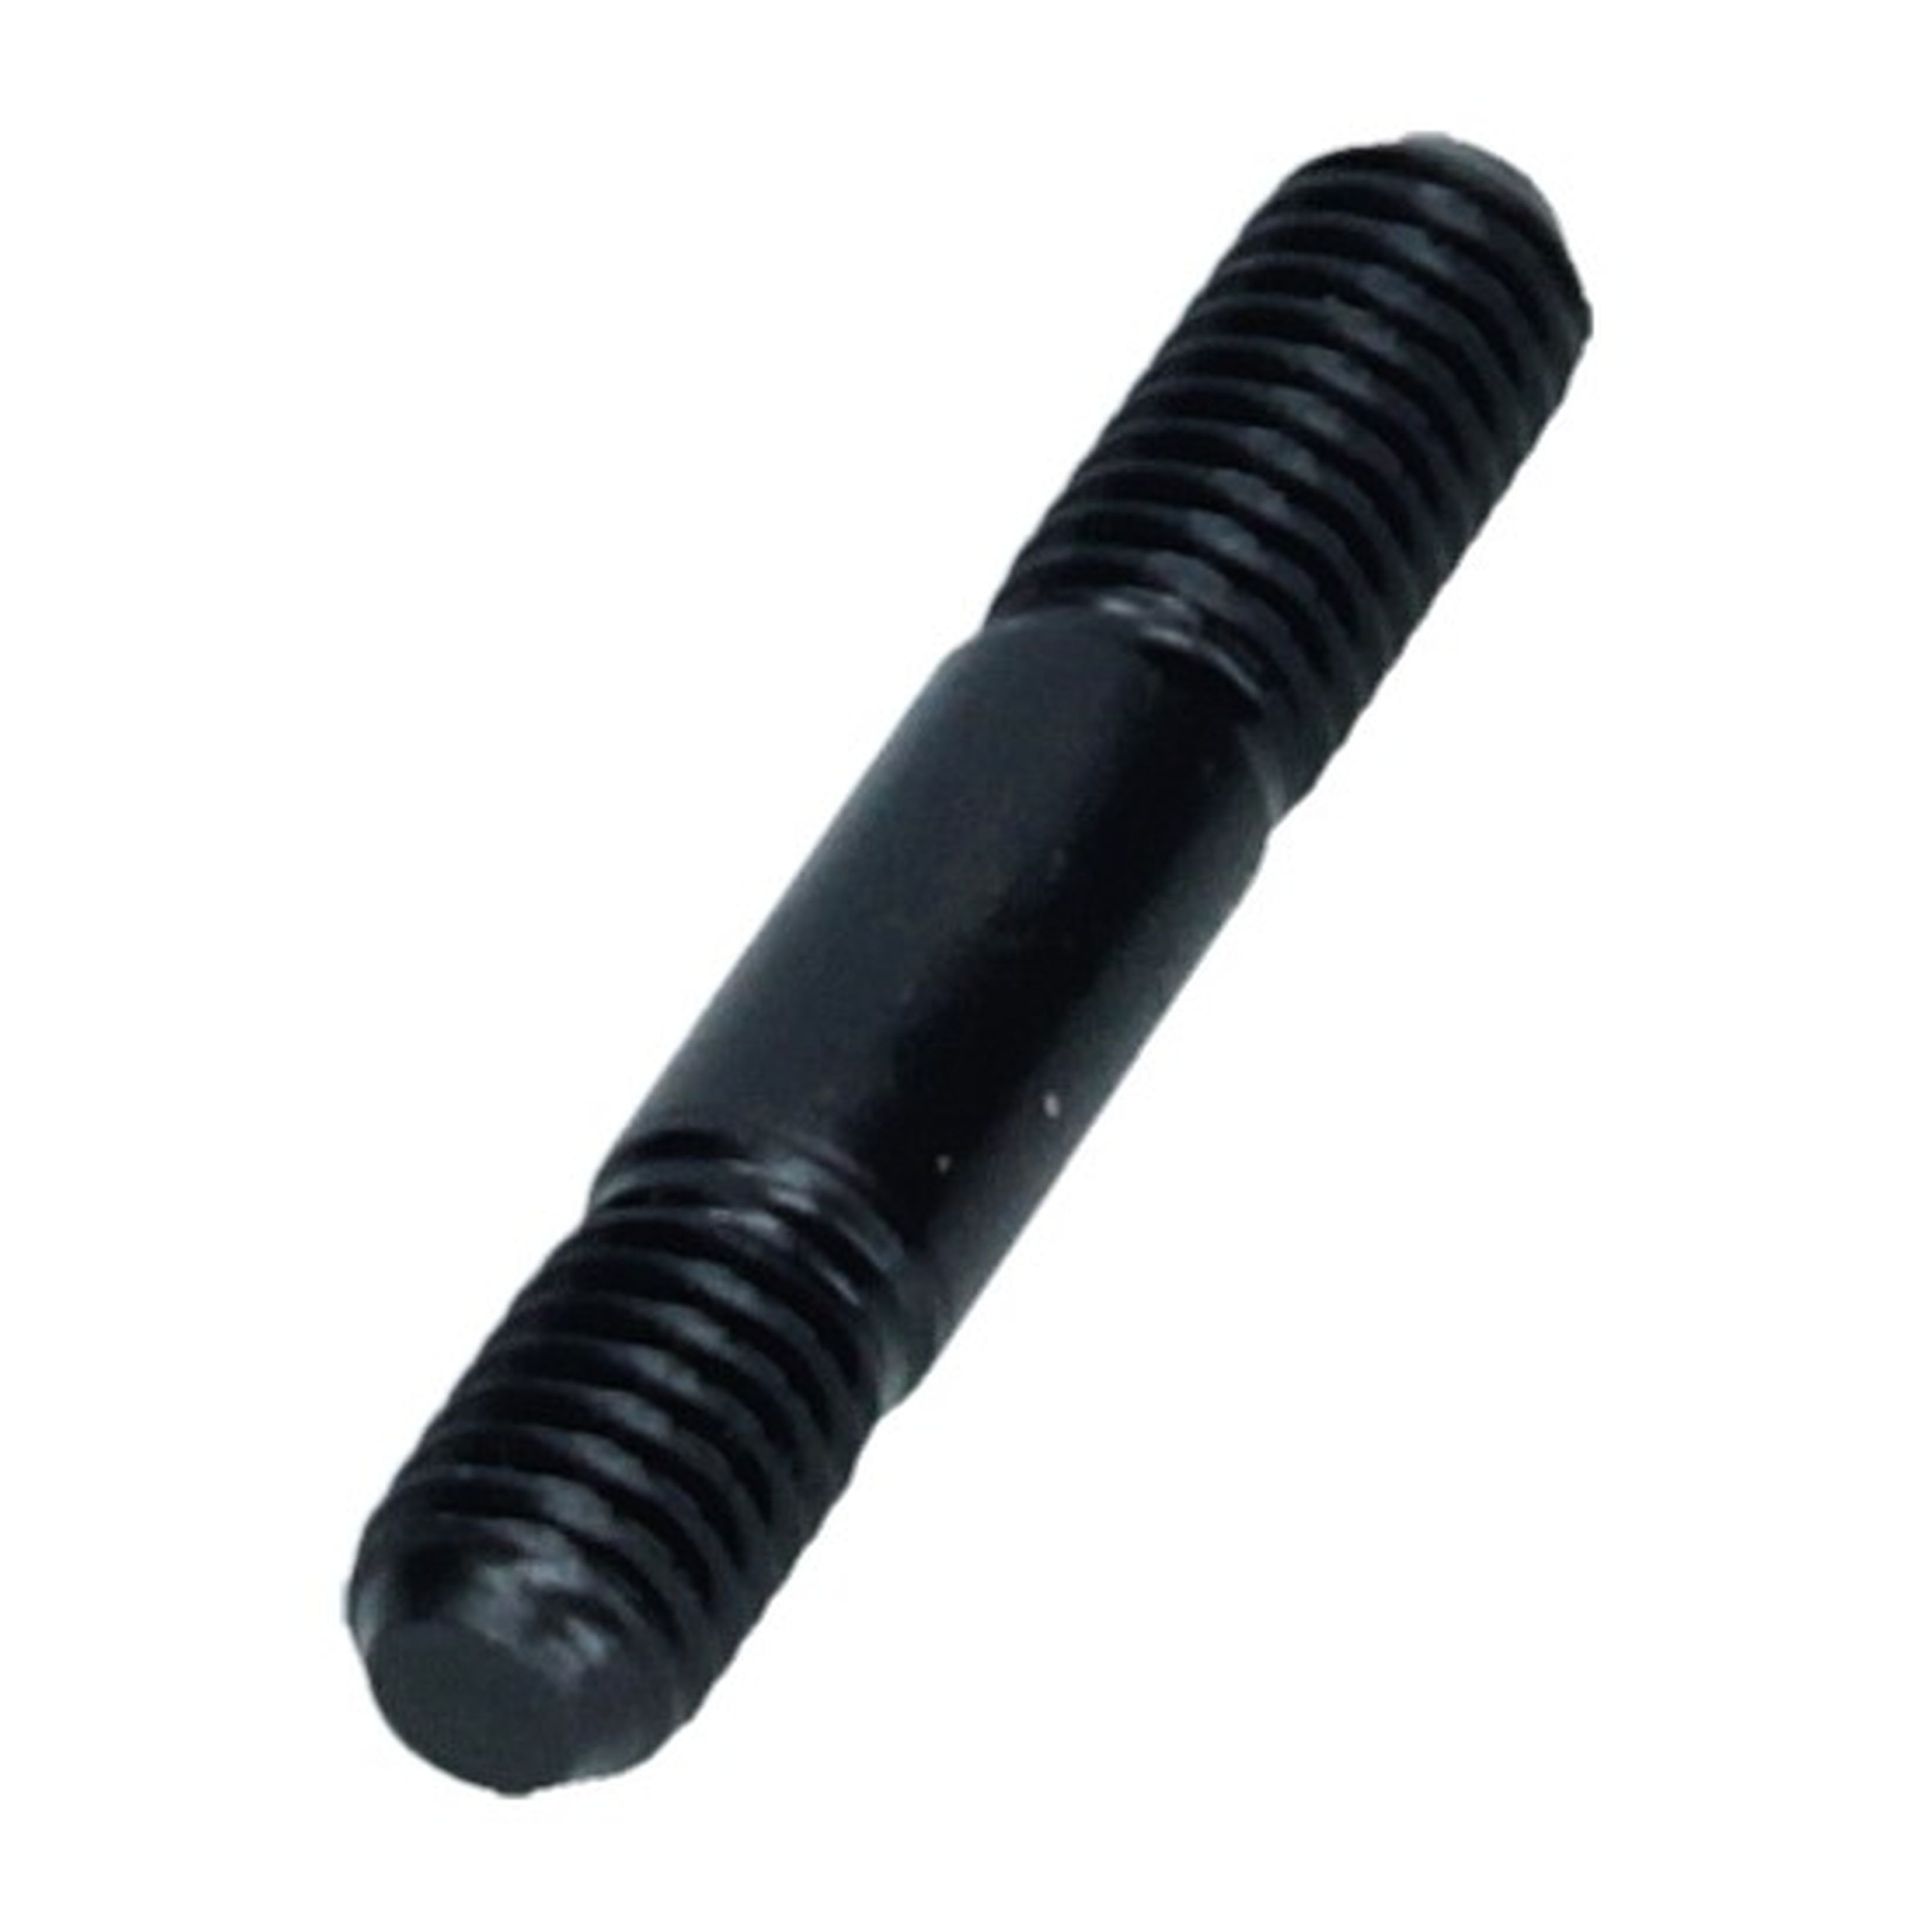 Timing Chain Cover Stud Short (M6x35)